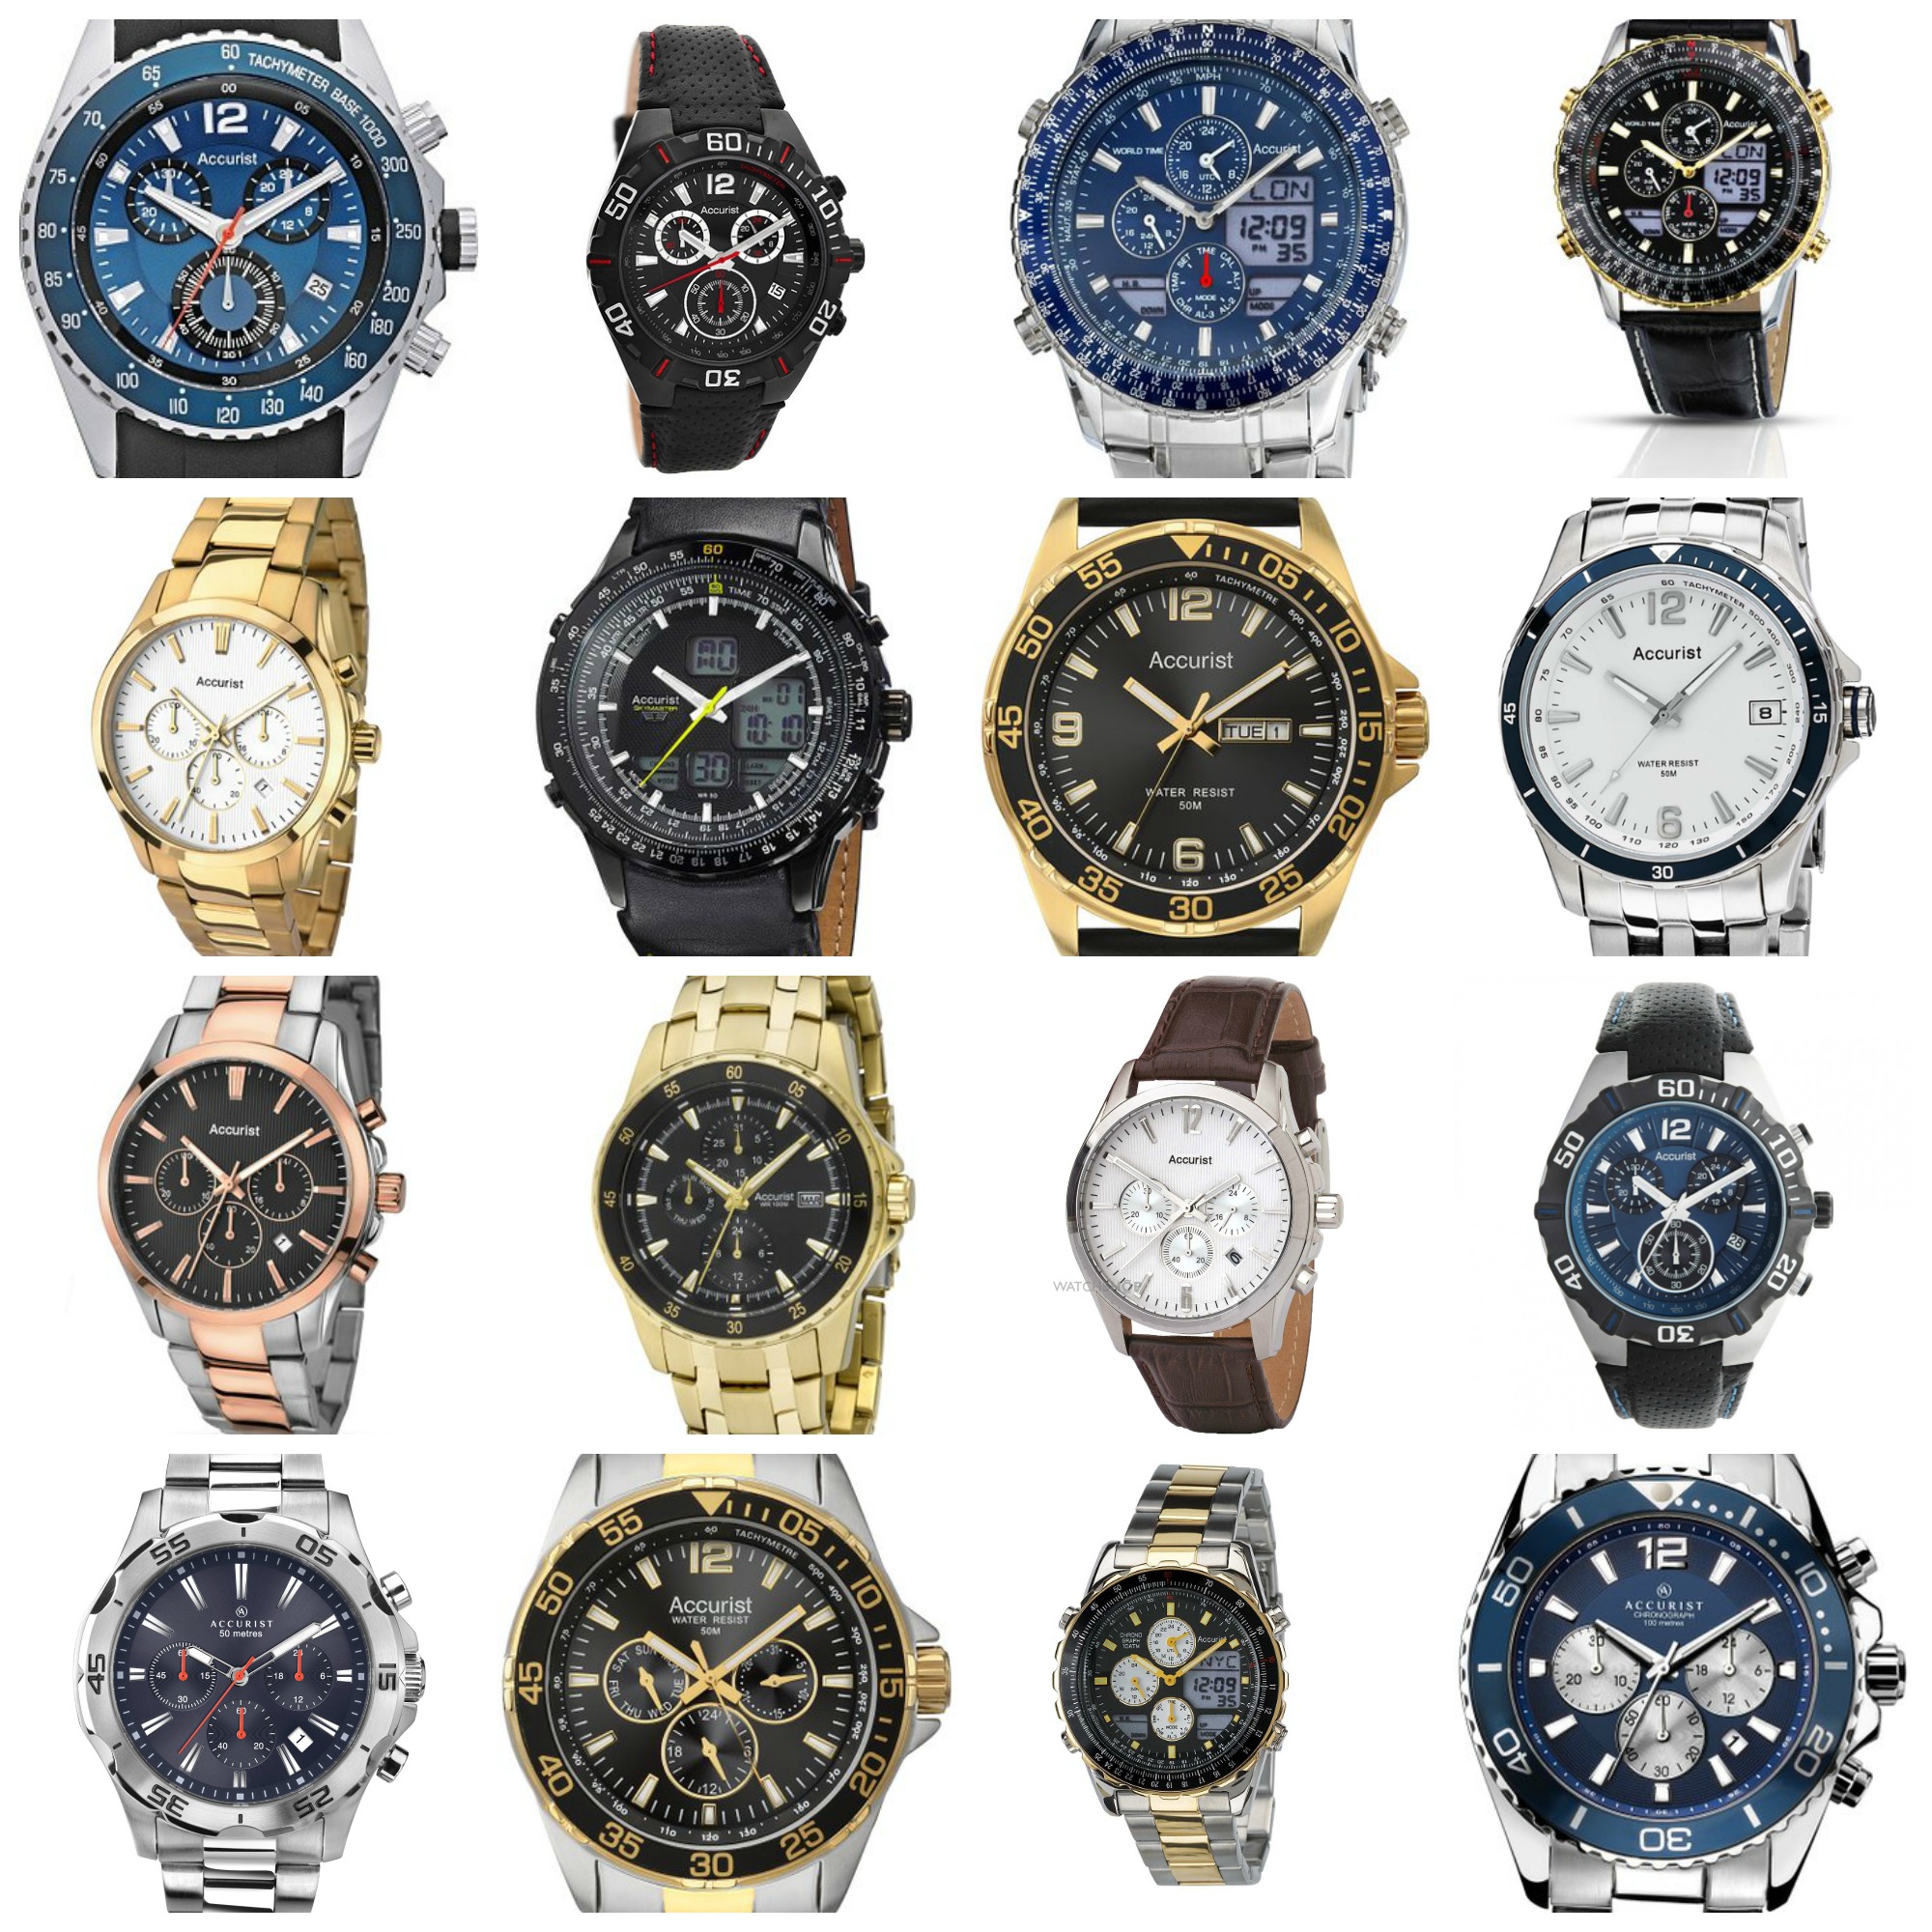 21 Most Popular Accurist Watches Under £100 For Men - The Watch Blog